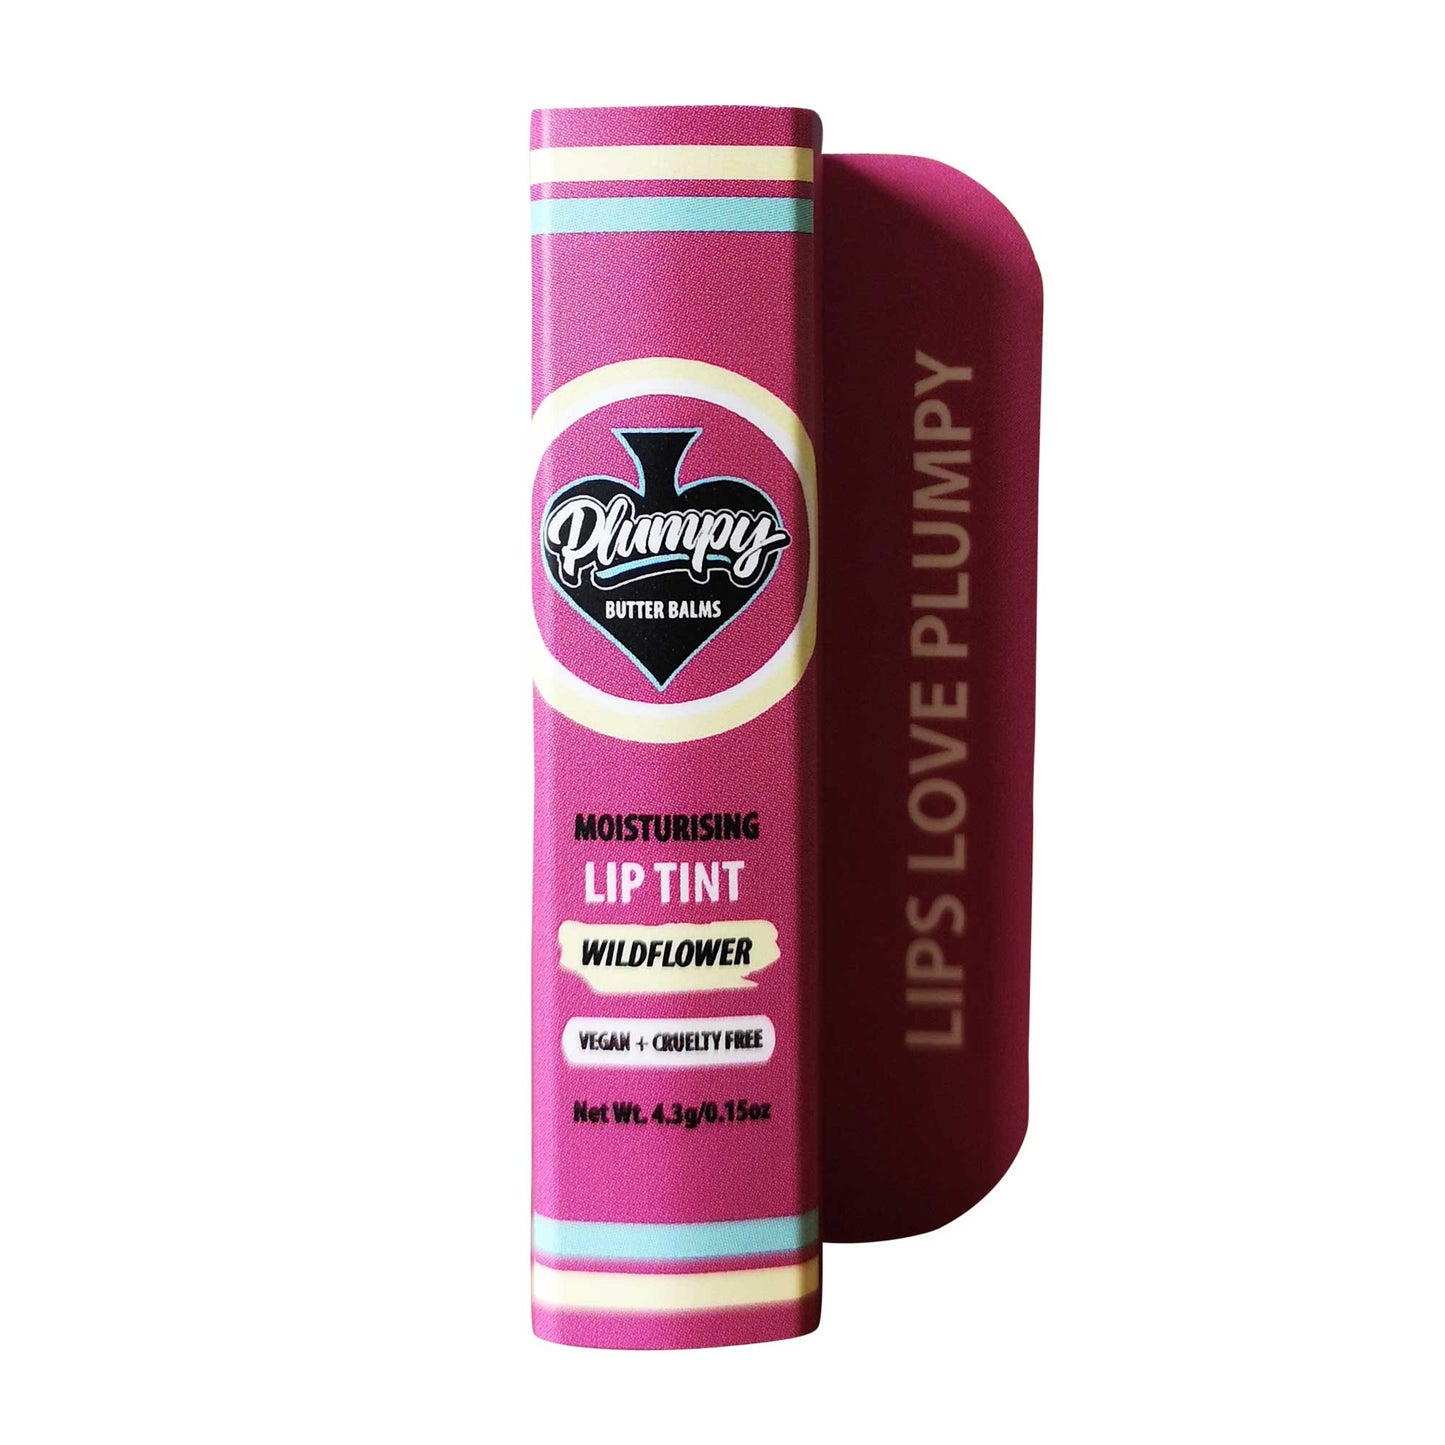 Load image into Gallery viewer, Plumpy Balms Wildflower berry shade lip tint
